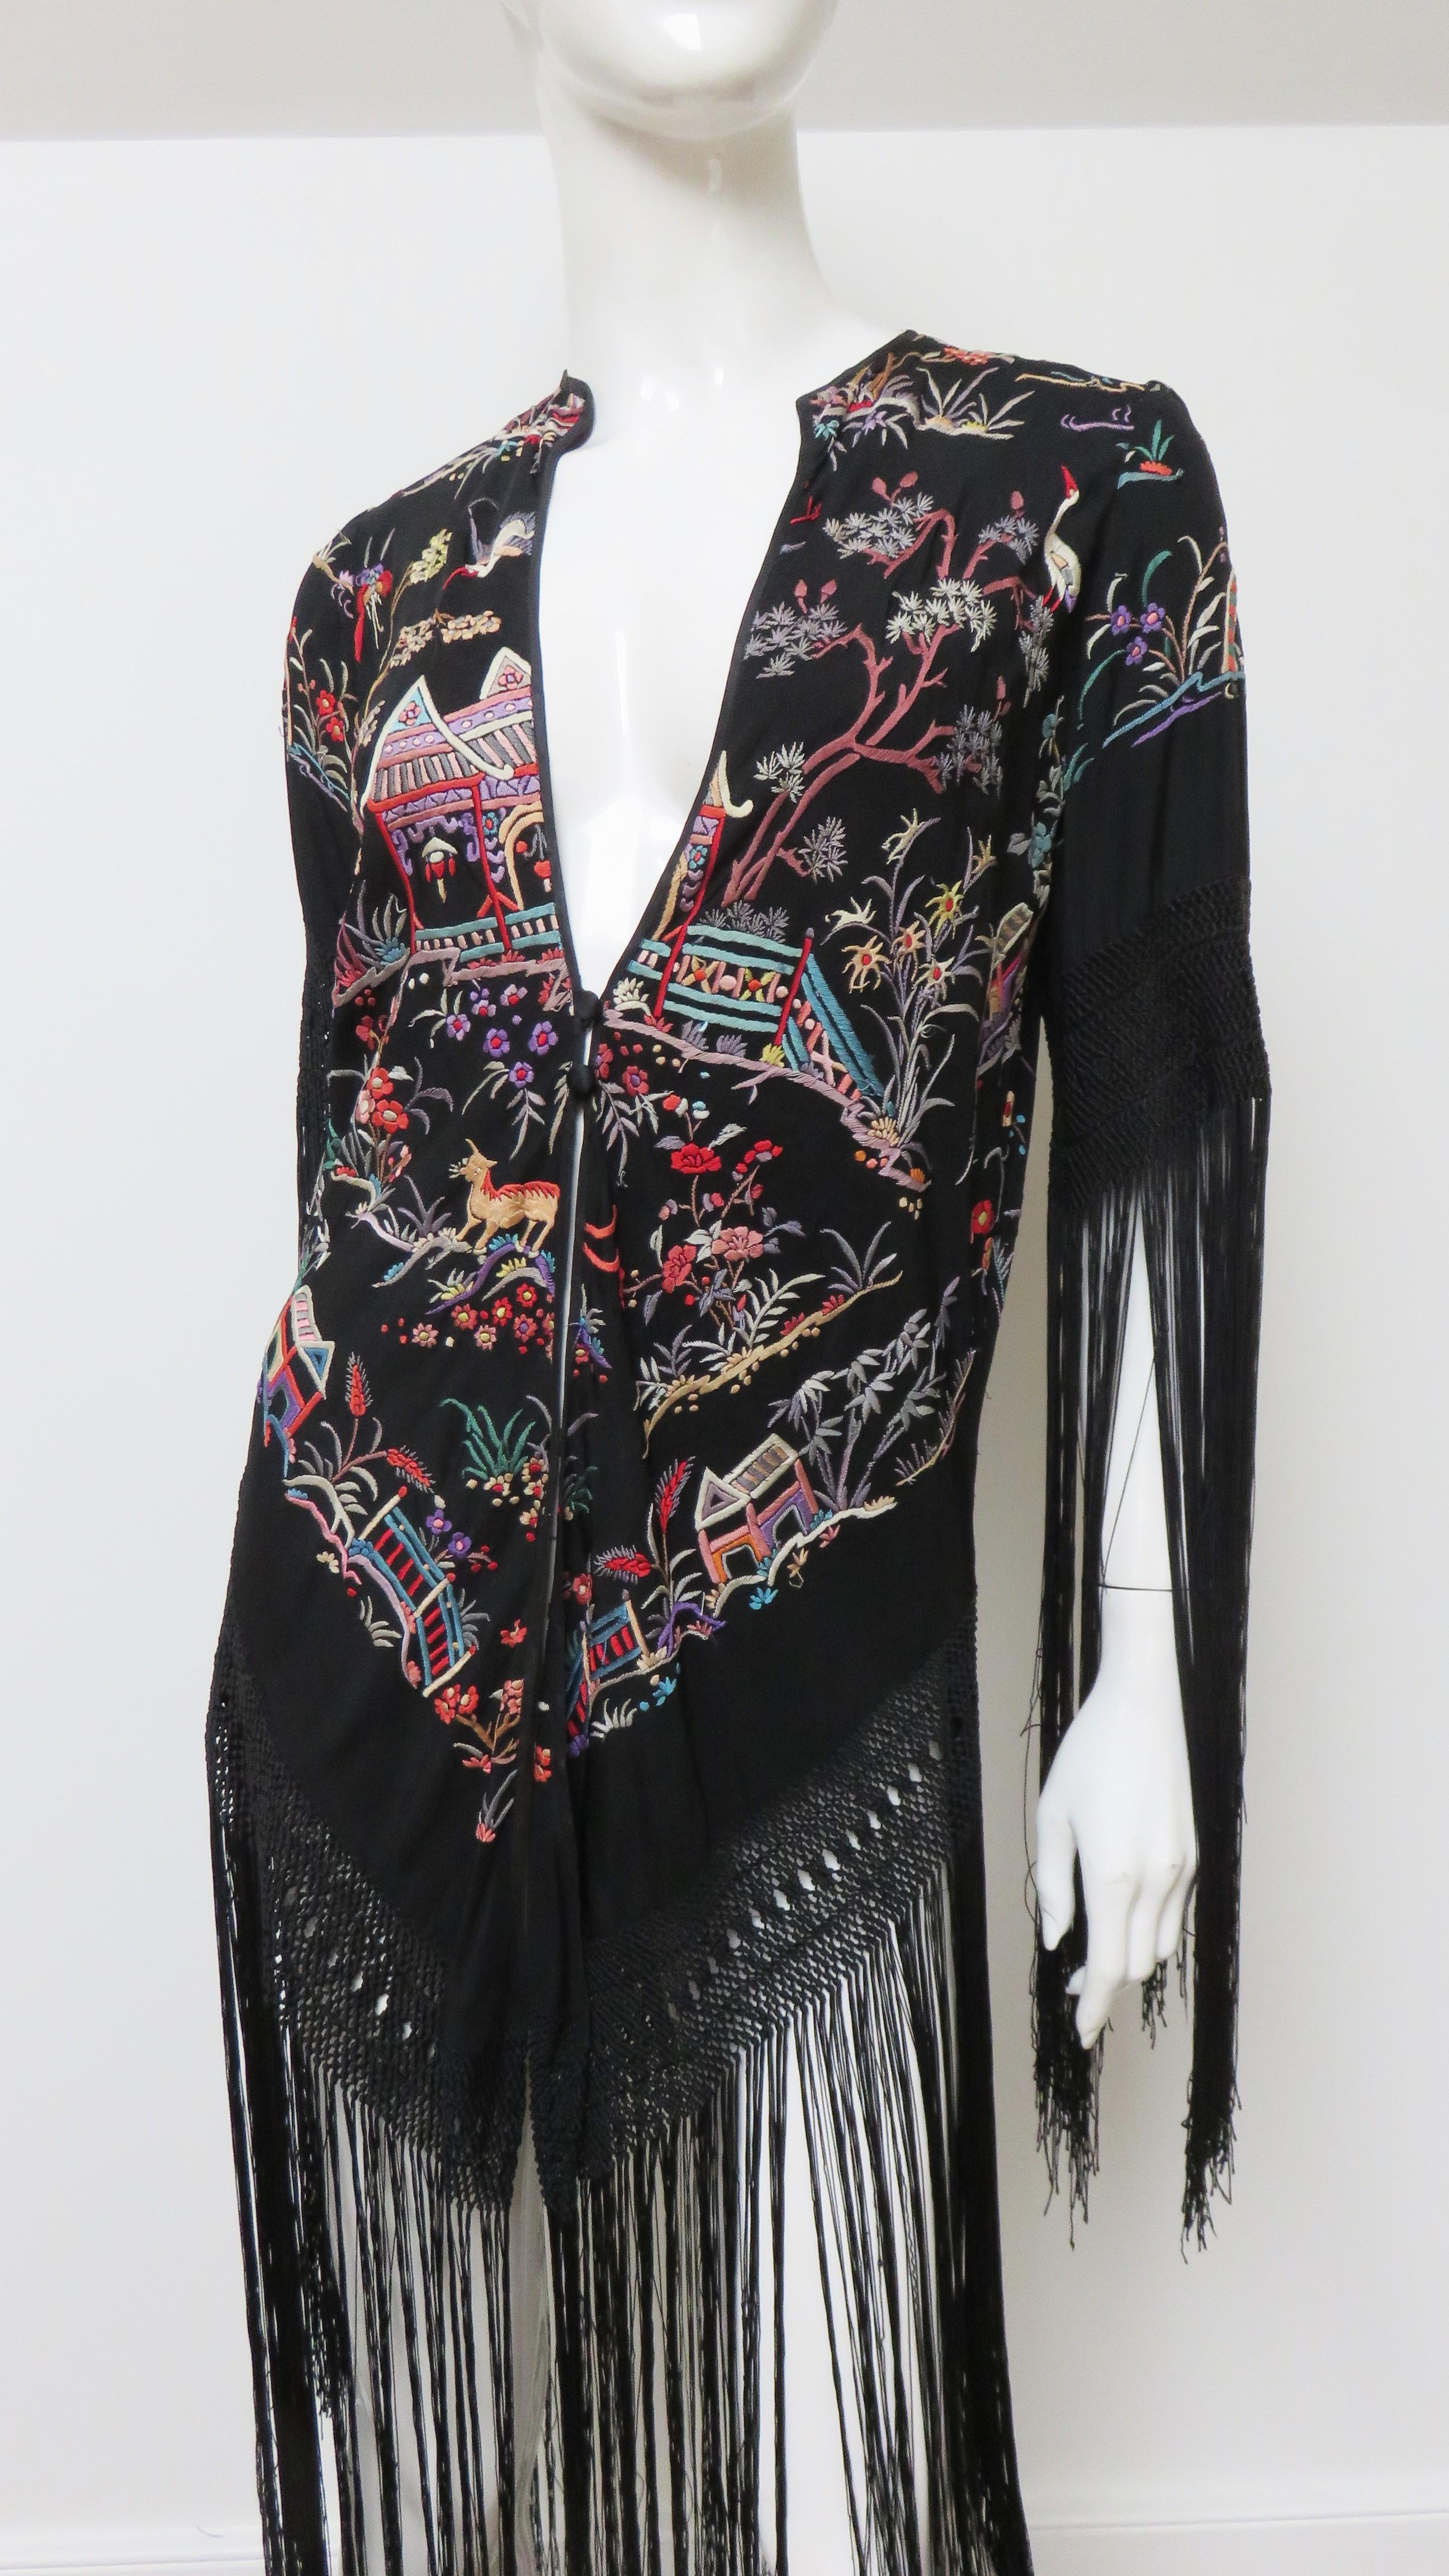 Antique Elaborately Embroidered 1920s Silk Jacket with Fringe In Good Condition For Sale In Water Mill, NY